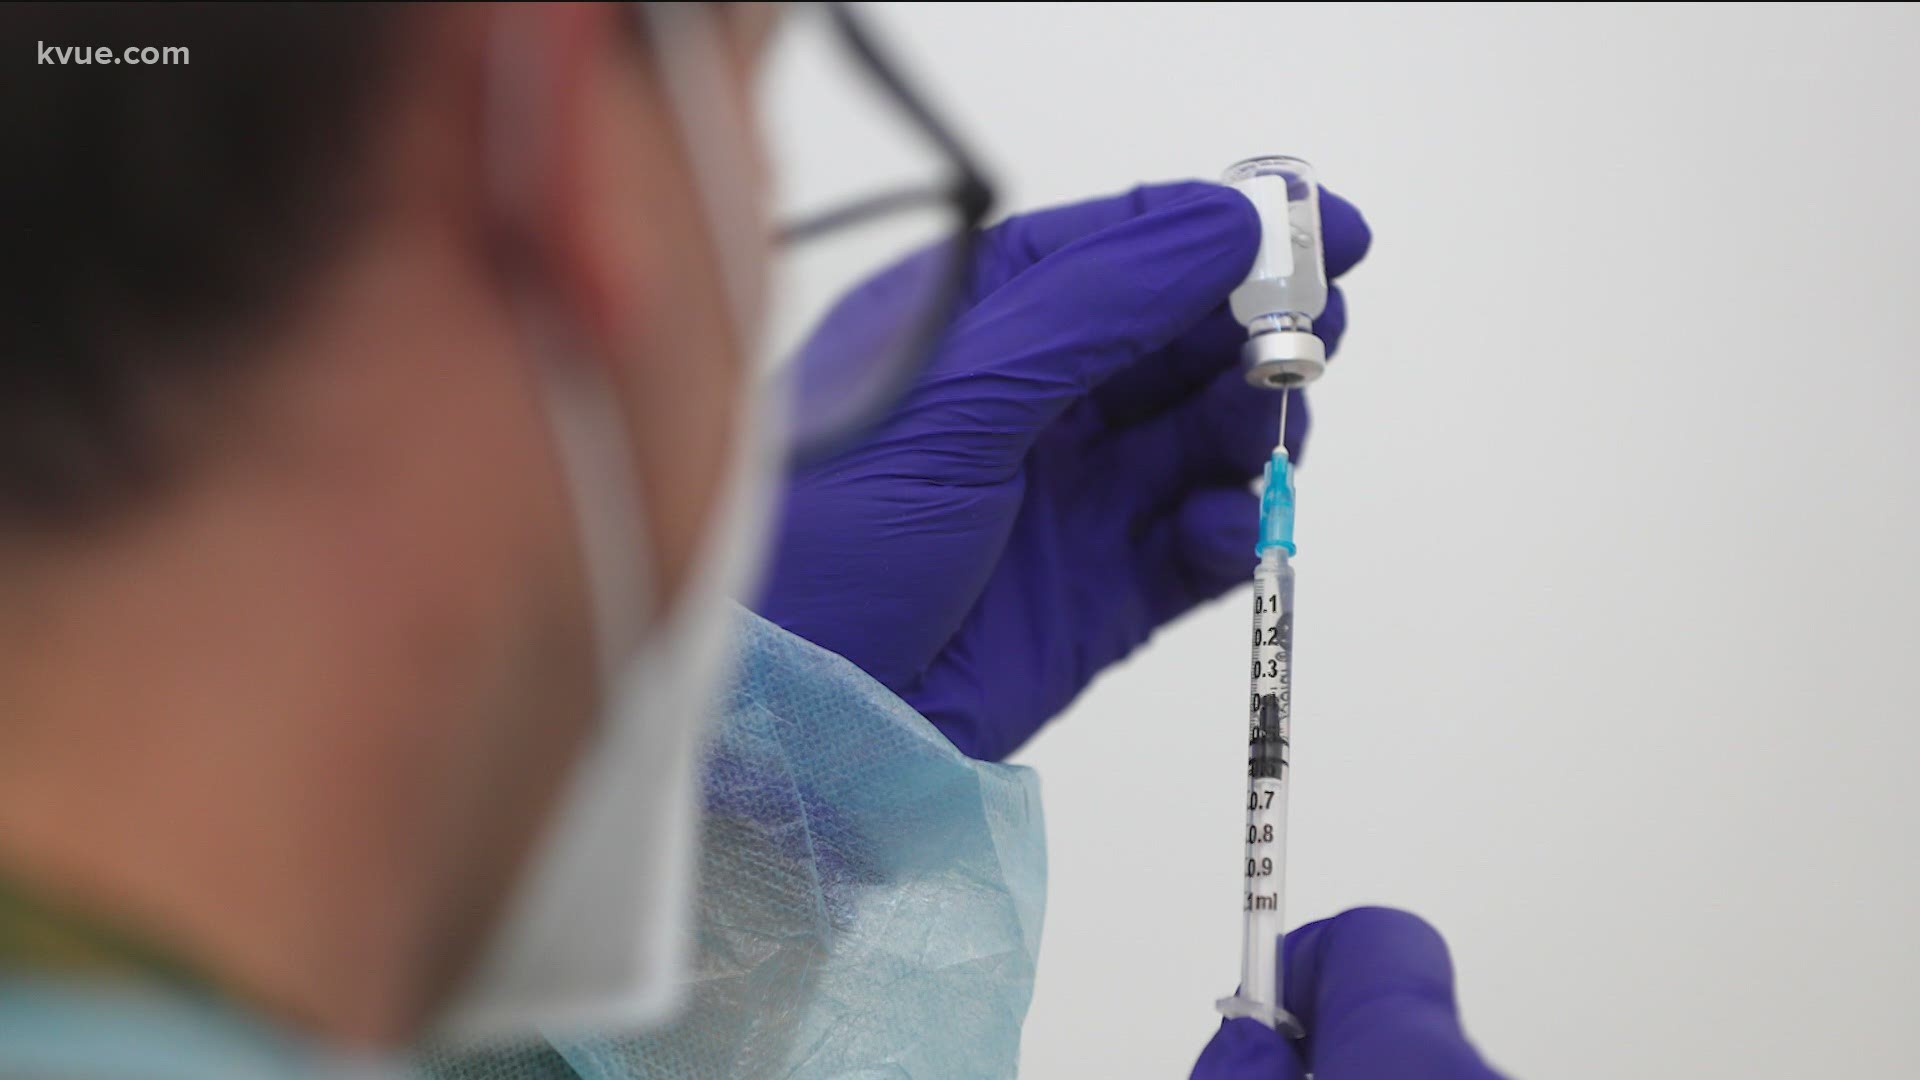 Four cases of the COVID-19 delta variant have been confirmed in Travis County. There is a renewed warning from health officials to get vaccinated.